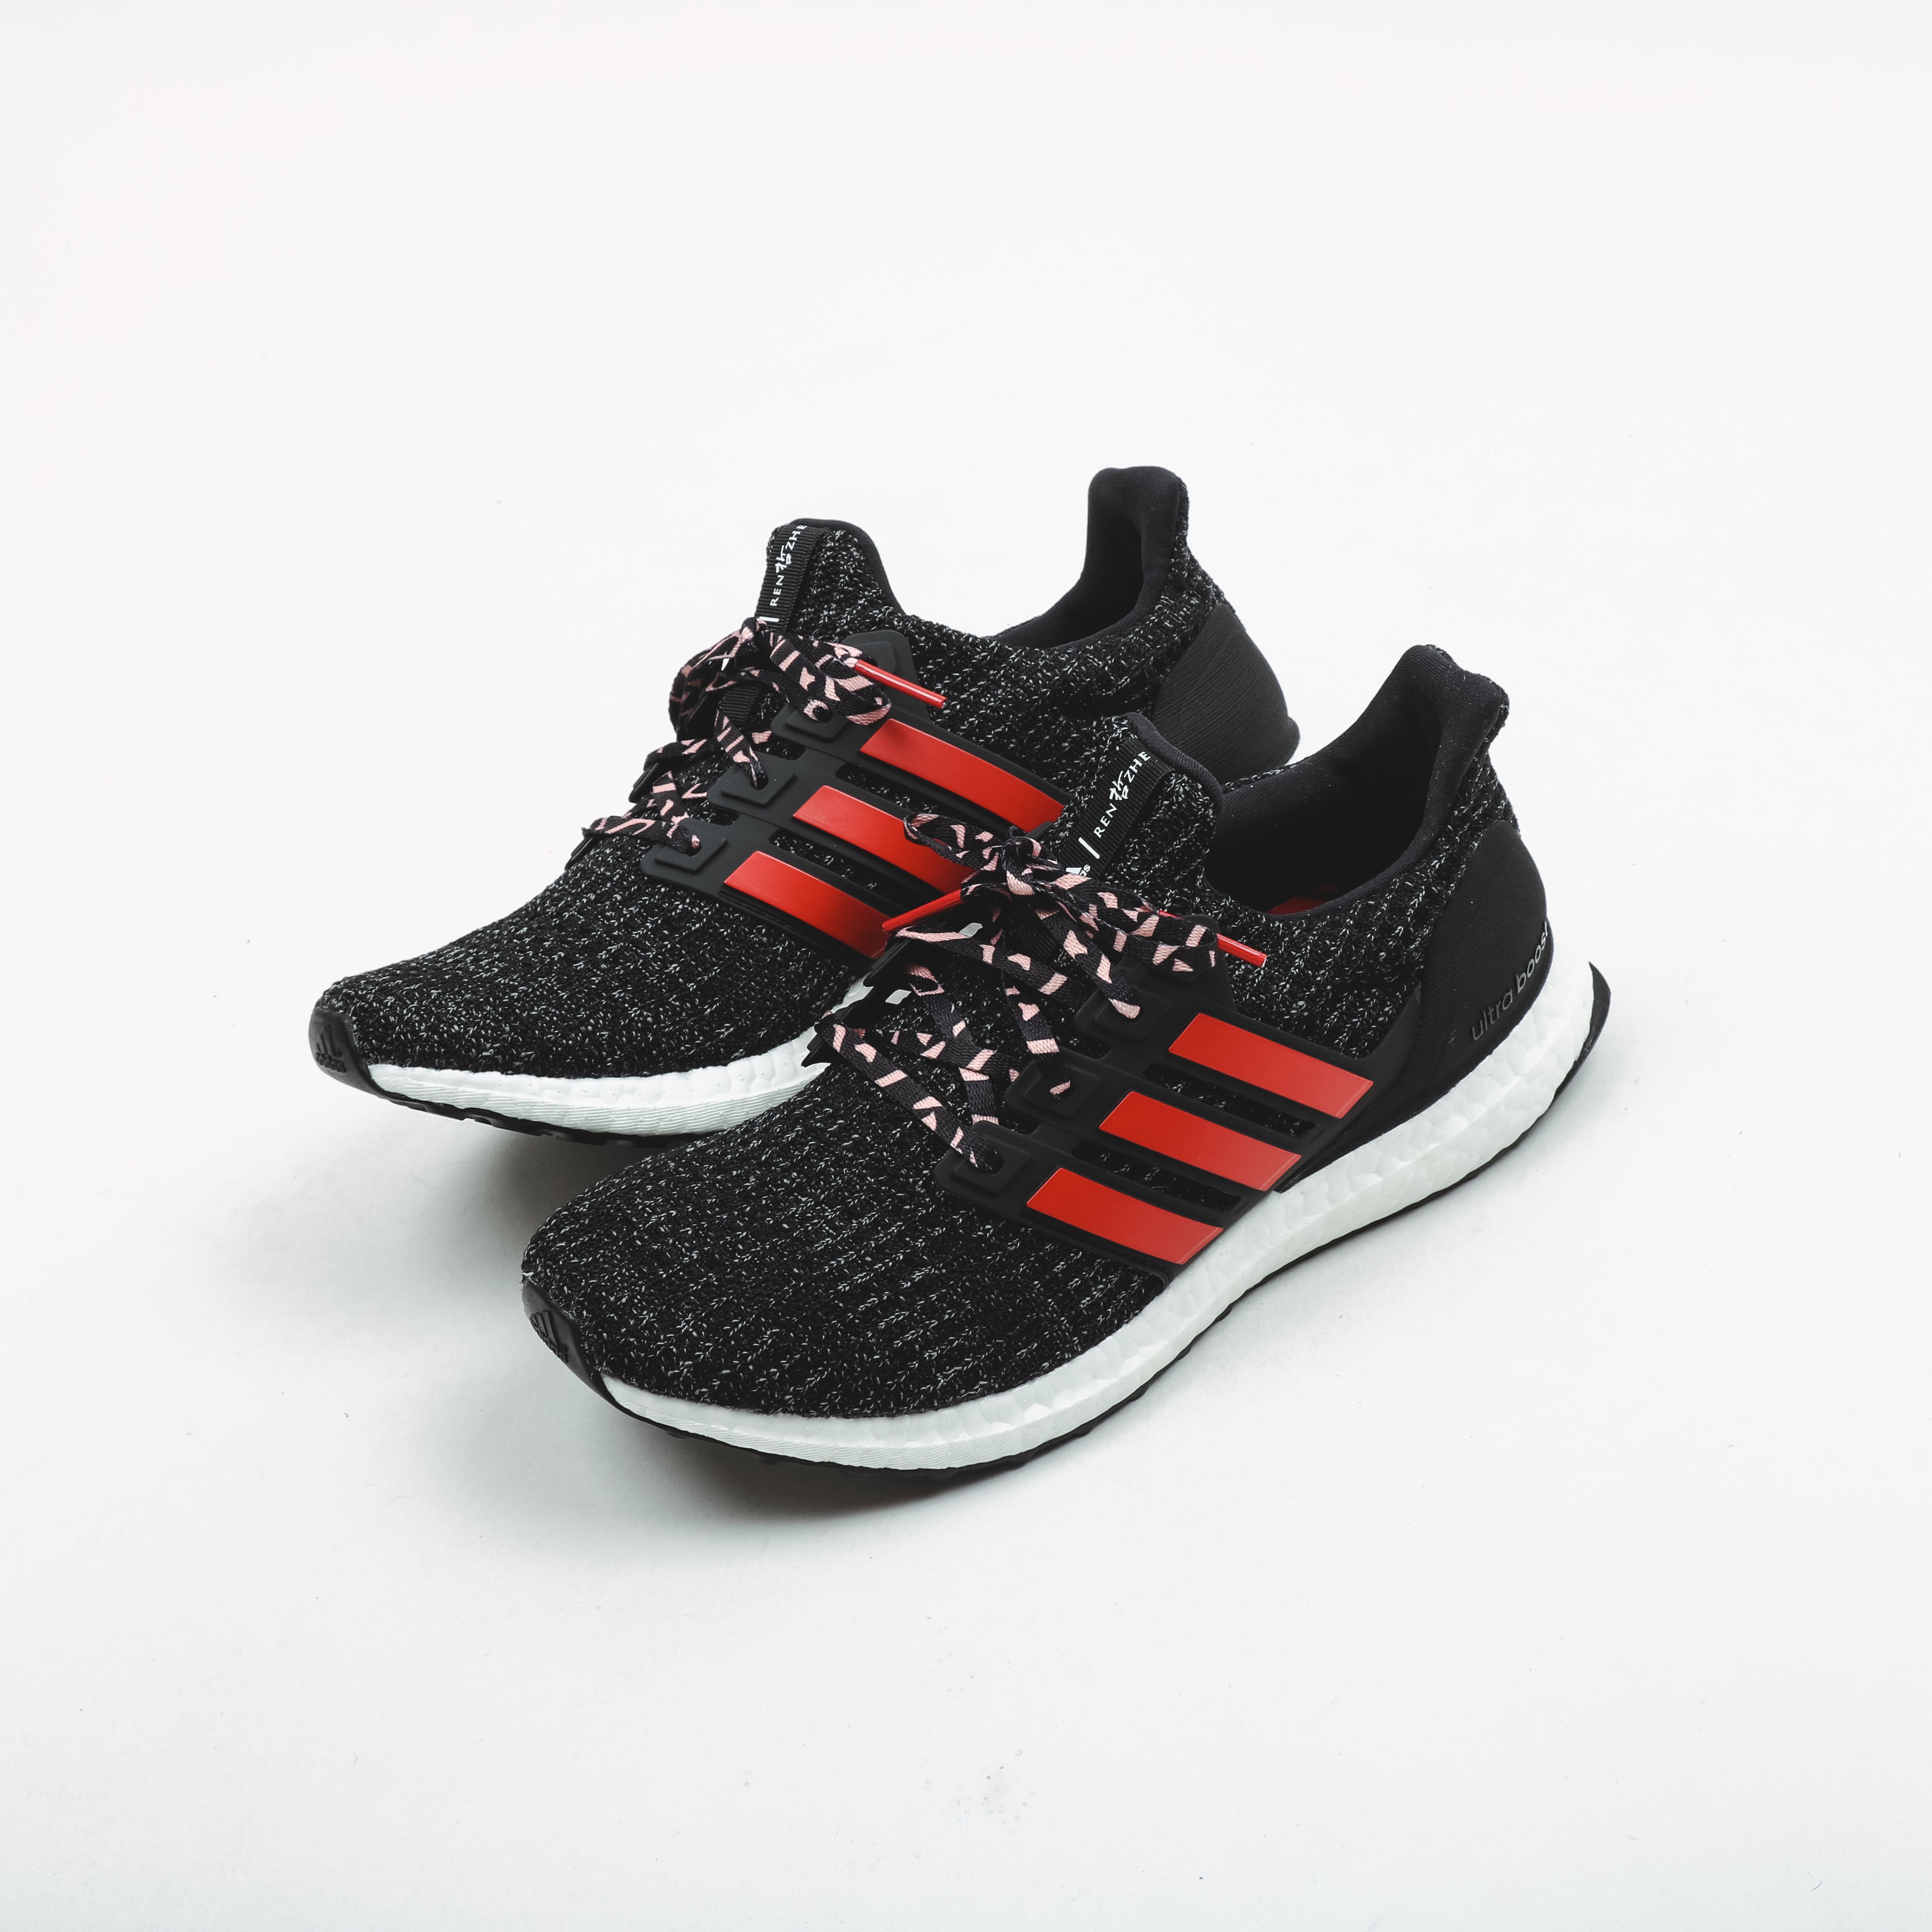 escapar sitio Bandido FOOTDISTRICT on Twitter: "For the Chinese New Year, adidas pays tribute to  Chinese contemporary sculpture artist Ren Zhe with the adidas UltraBOOST "Ren  Zhe". Online &amp; in store now: https://t.co/Ey1ts2PH6U #adidas  #UltraBOOST #